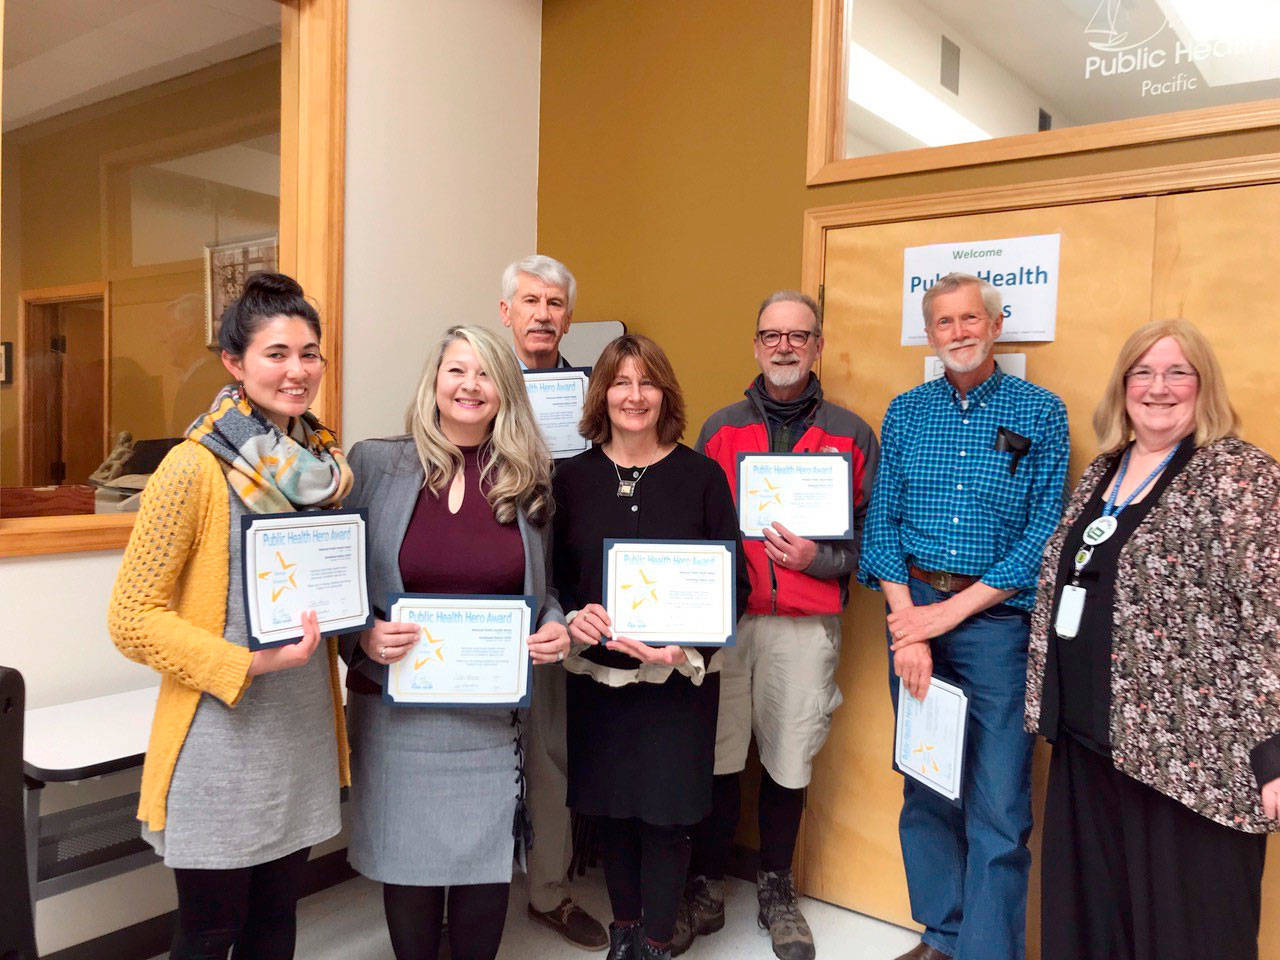 Jefferson County Public Health’s 2019 Health Heroes, from left, are Teresa Shiraishi, Dove House; Julie Iszley, Washington Health Care Authority; Bob Bindschadler, Climate Action Group Local 20/20; Susan O’Brien, Jefferson County Public Health; Dace Thielk, The Recyclery; Kees Kolff, Jefferson County Board of Health; and Vicki Kirkpatrick, director of Jefferson County Public Health. Owen Fairbank is not shown.